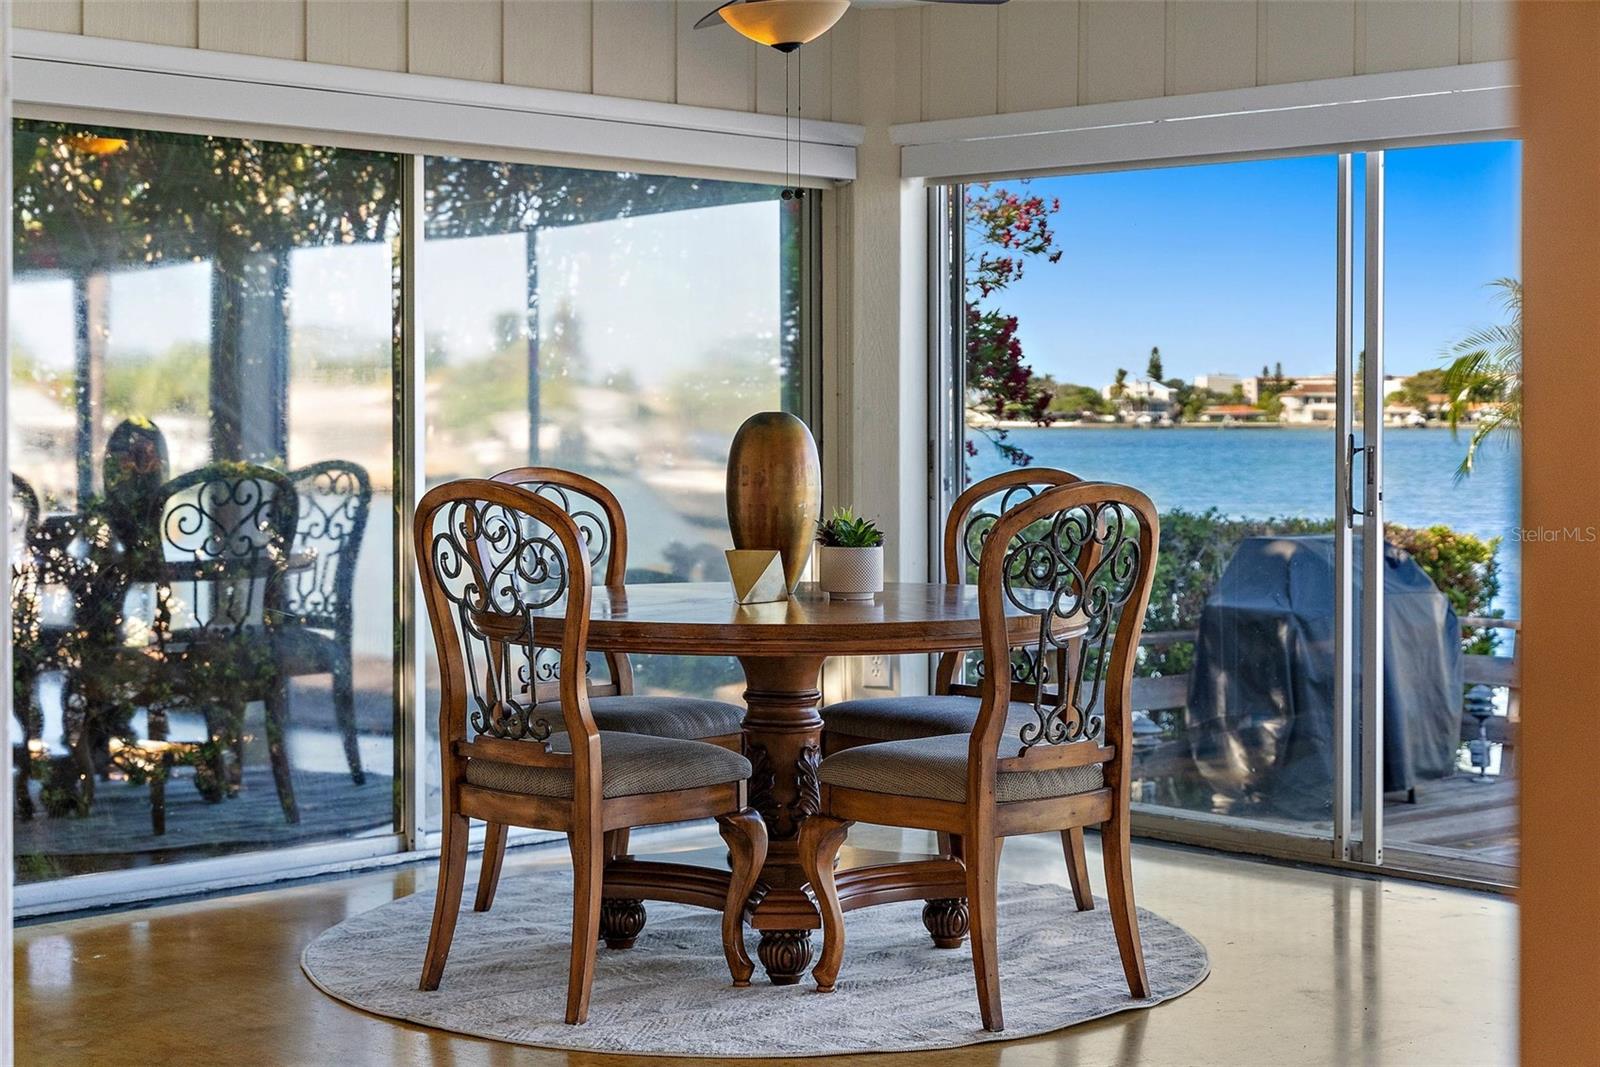 Imagine morning coffee here in your Sun Room!